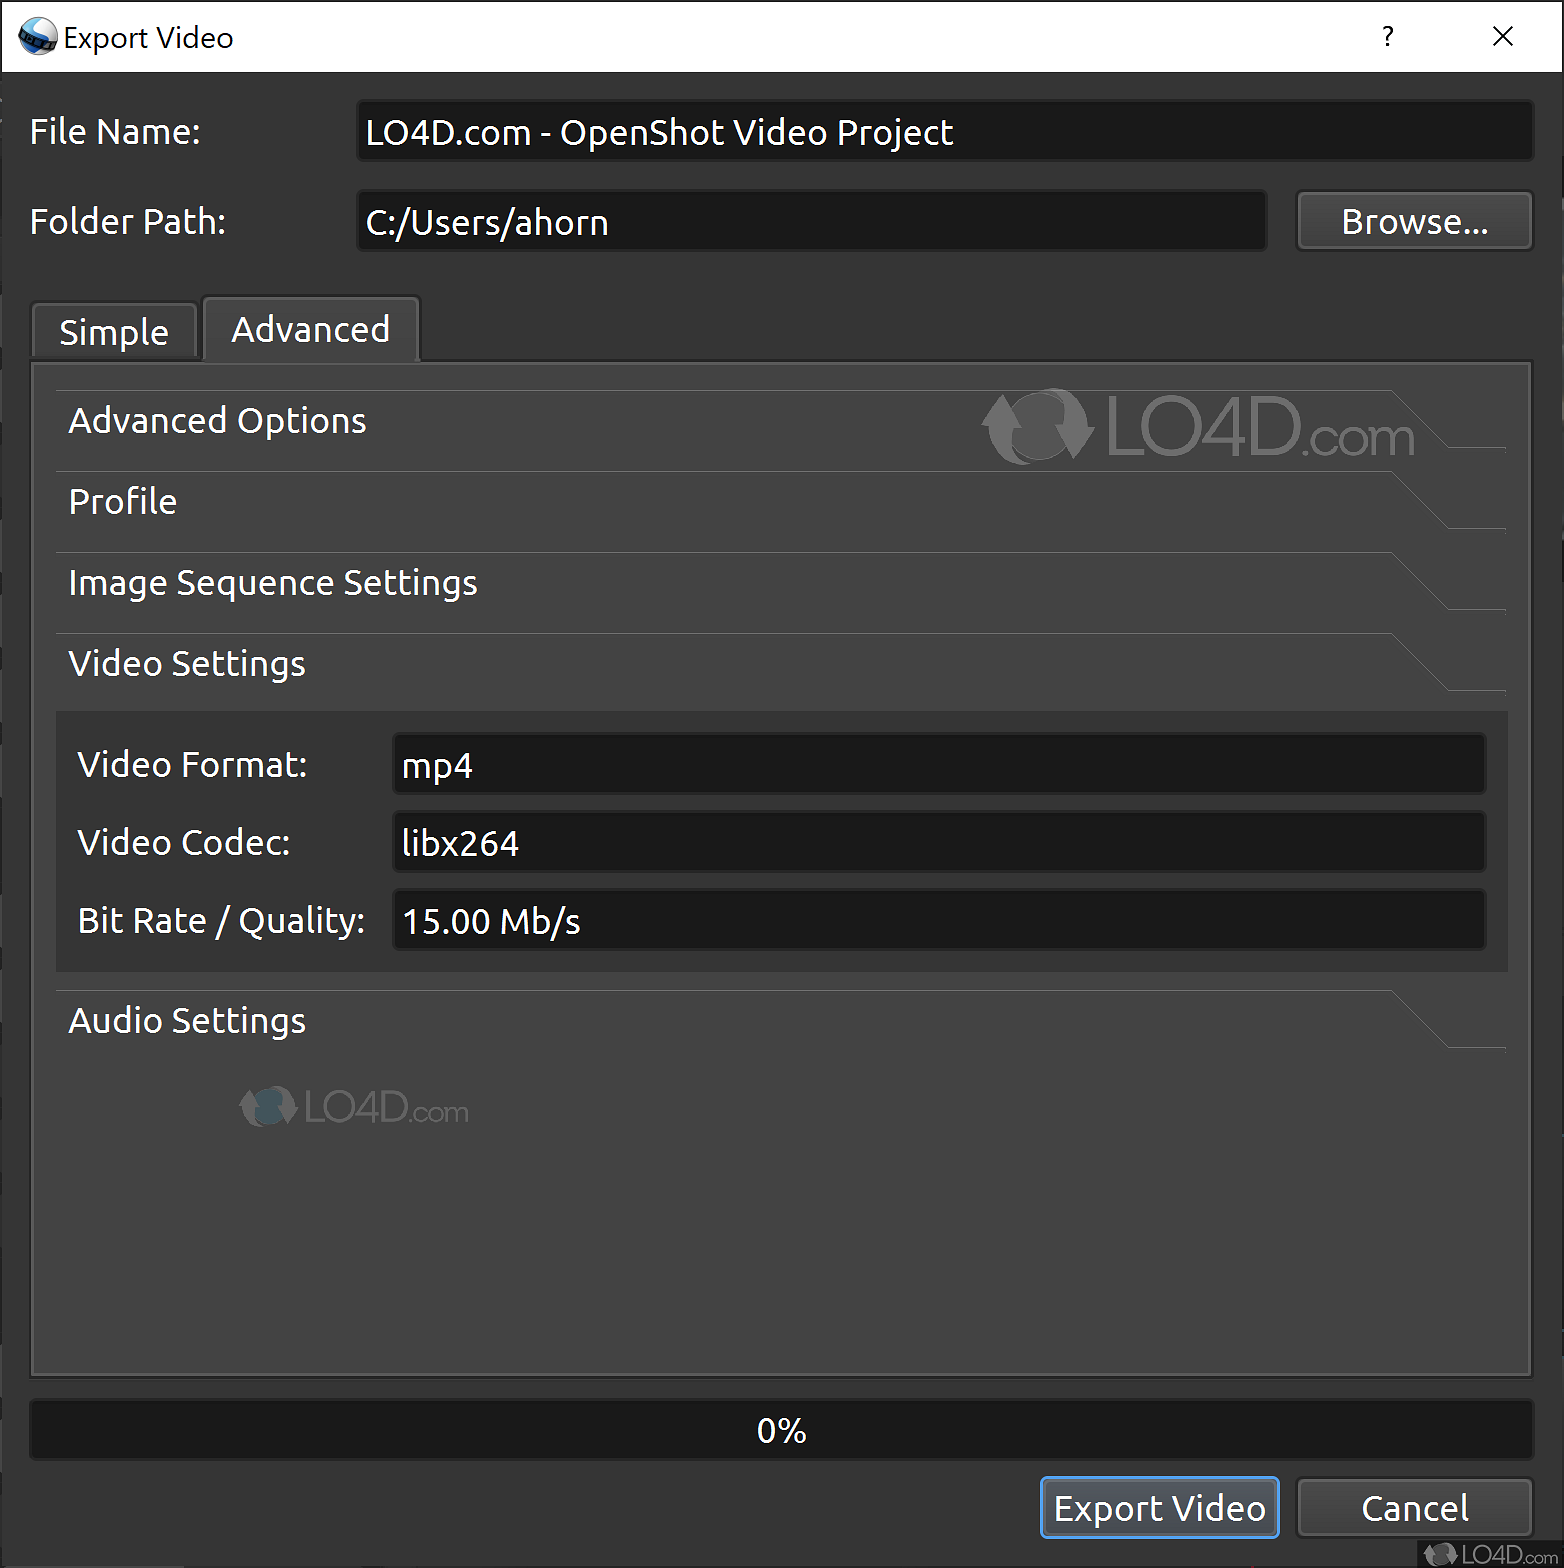 openshot video editor system requirements